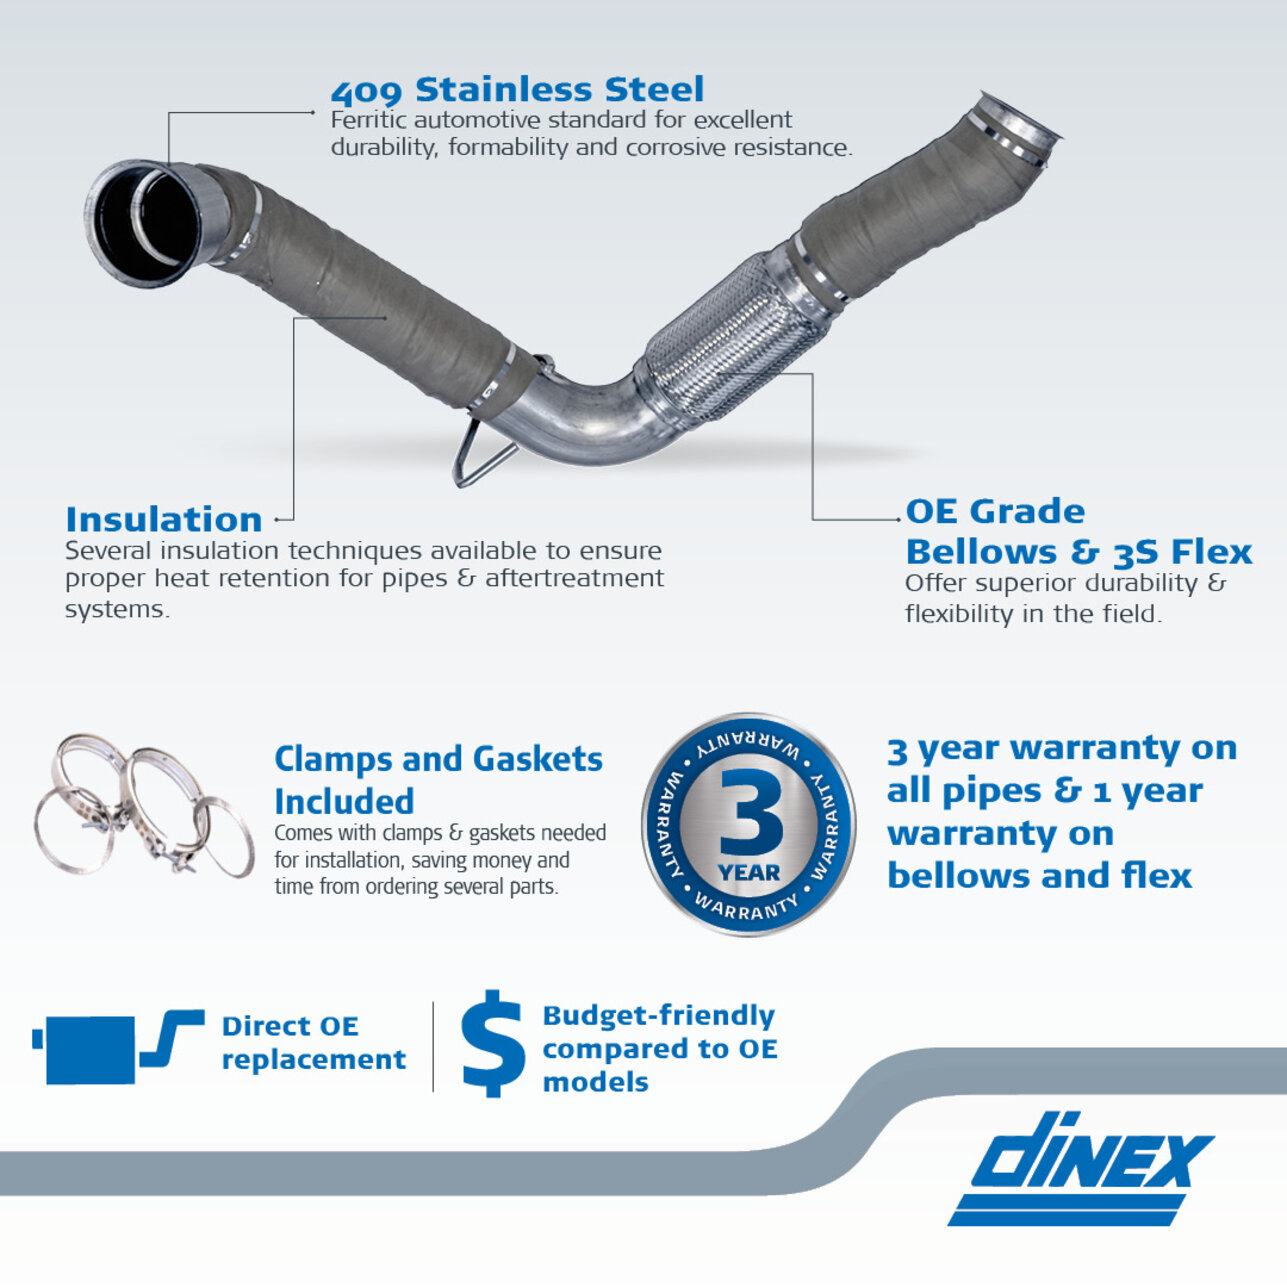 Dinex offers pipe technology systems